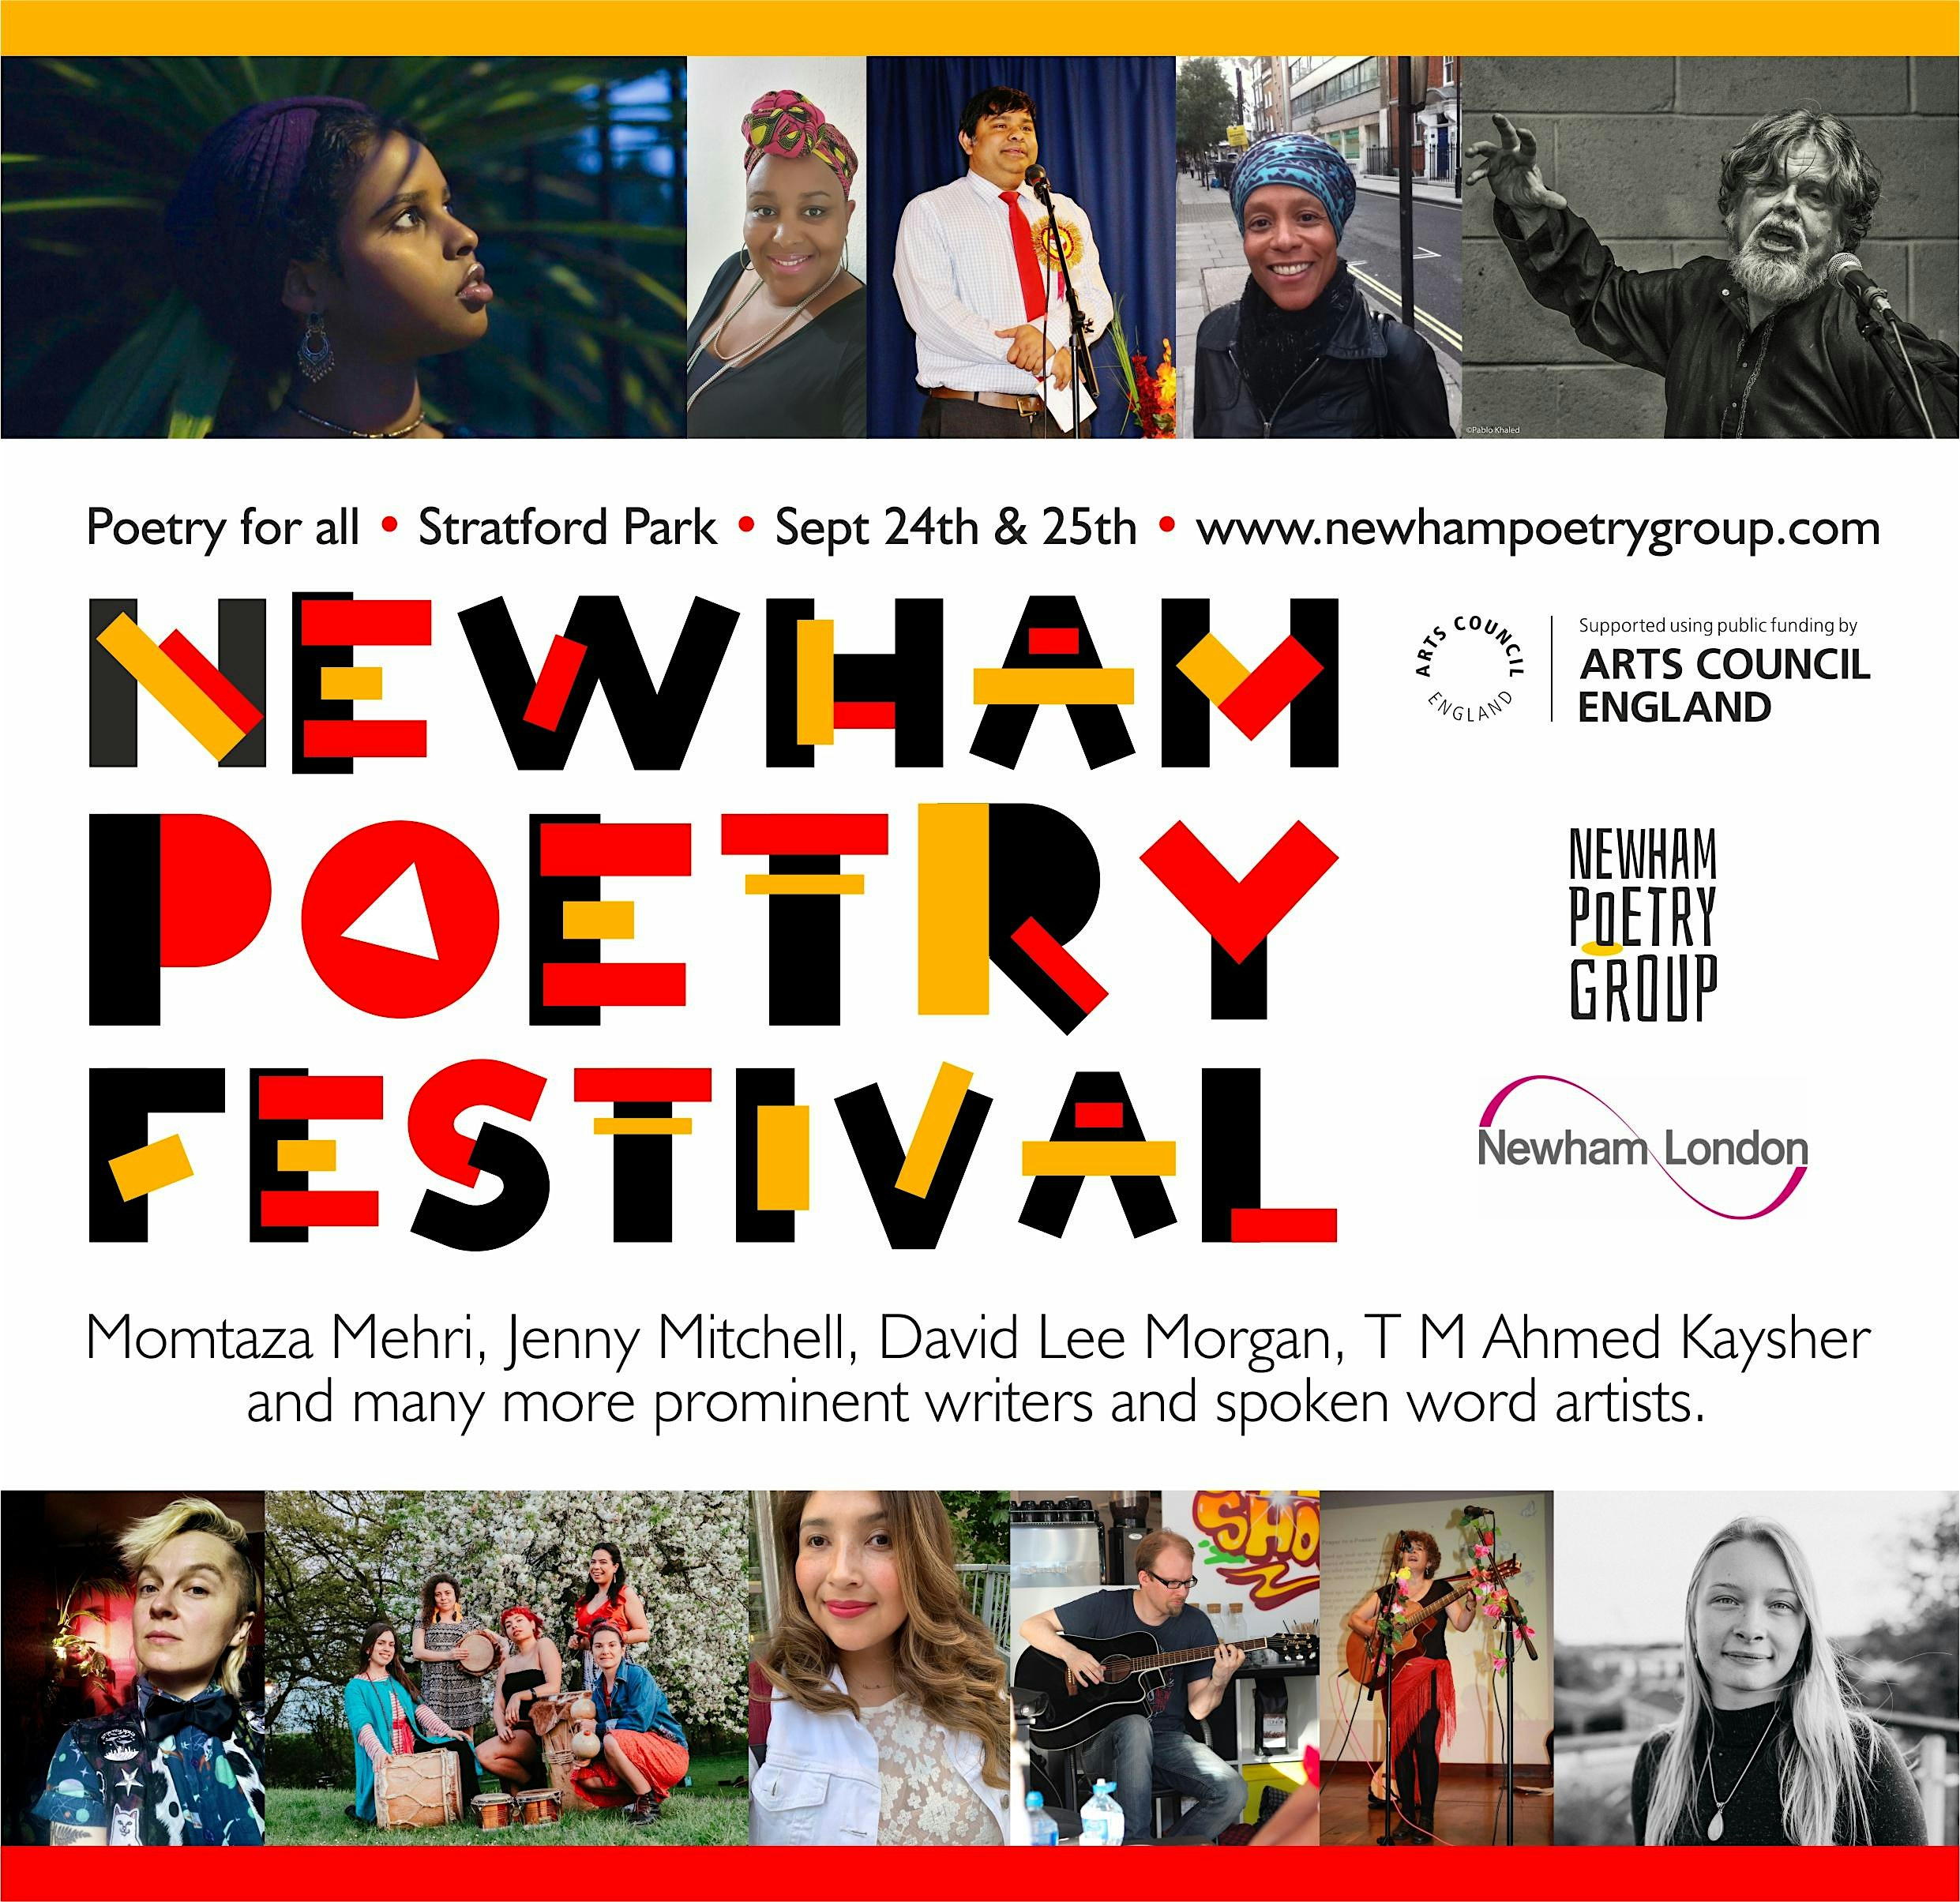 Newham Poetry Festival - Poetry For All